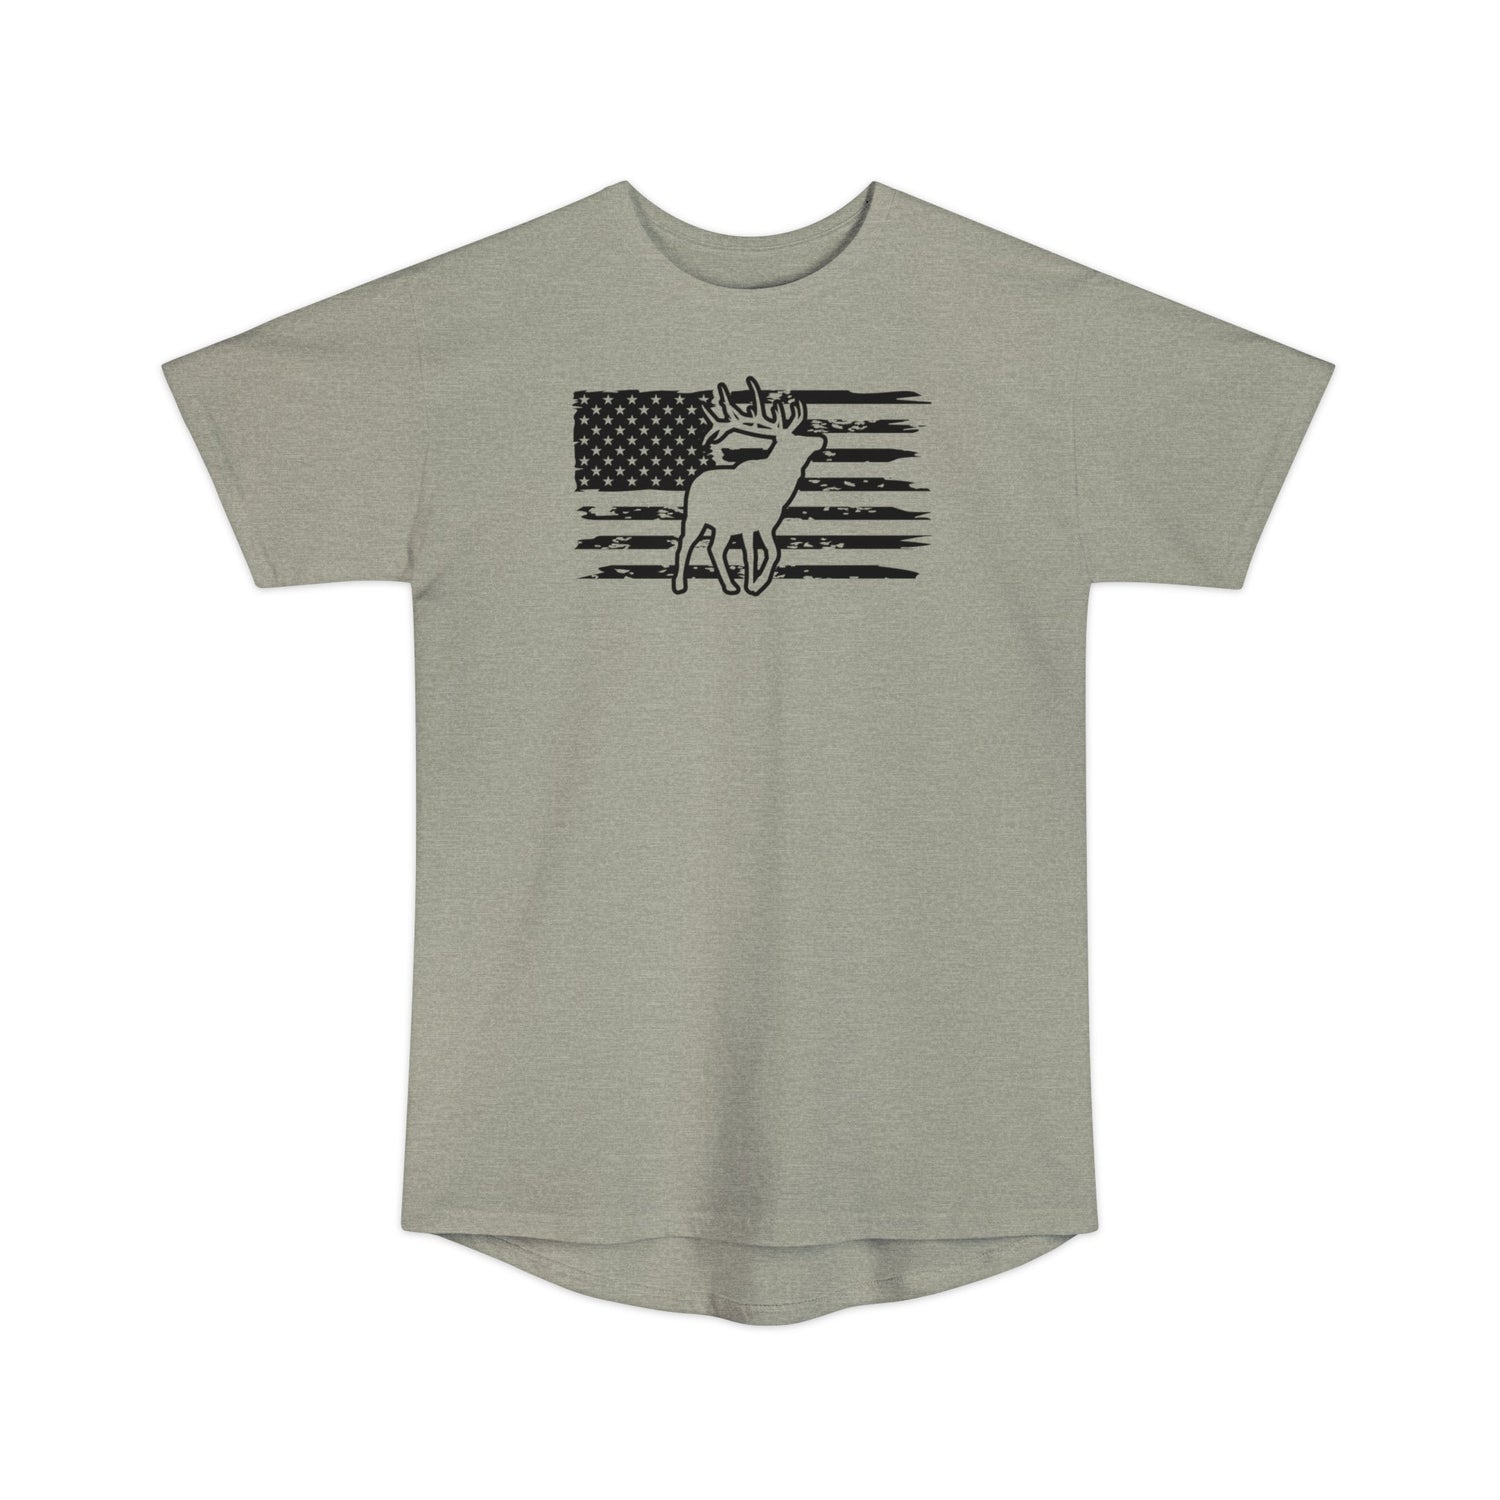 Athletic tall patriotic elk hunting t-shirt, color light grey, front design placement